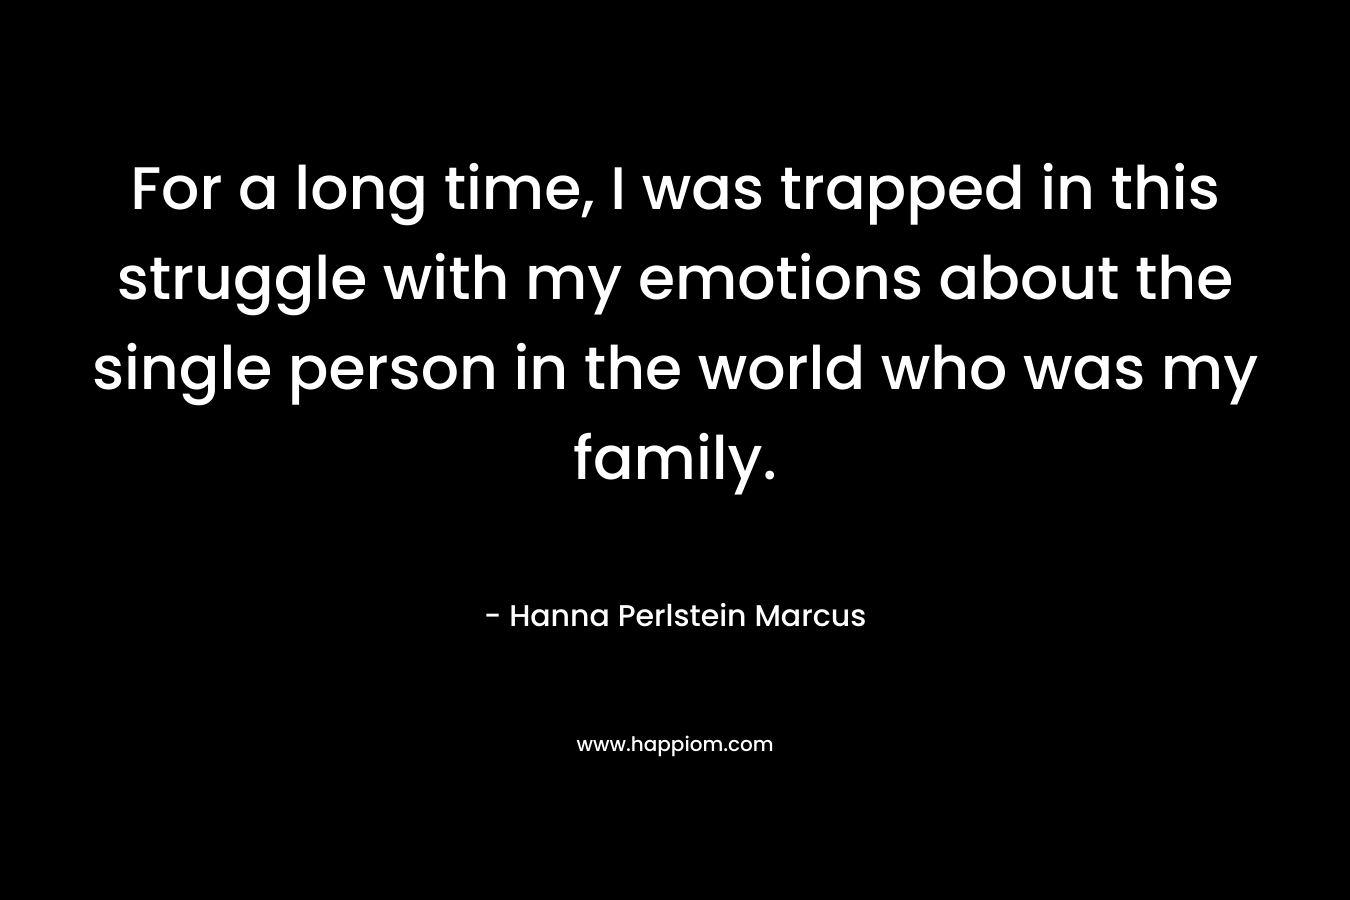 For a long time, I was trapped in this struggle with my emotions about the single person in the world who was my family.